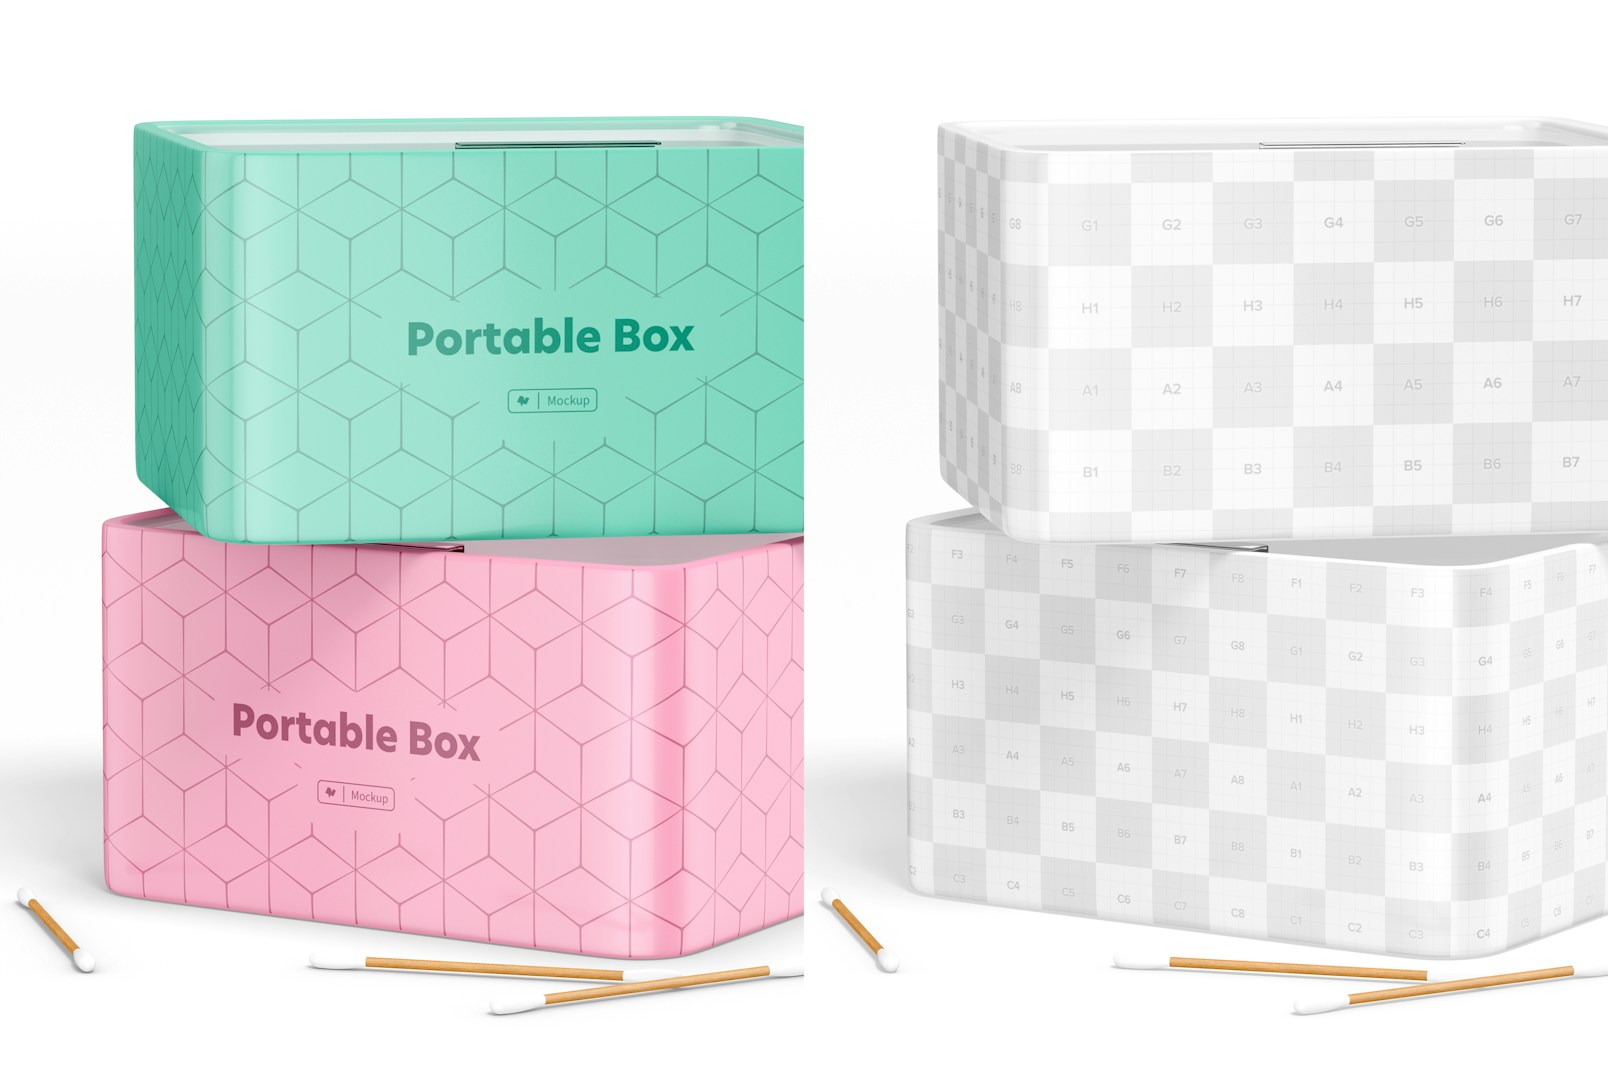 Portable Boxes with Clear Lid Mockup, Stacked